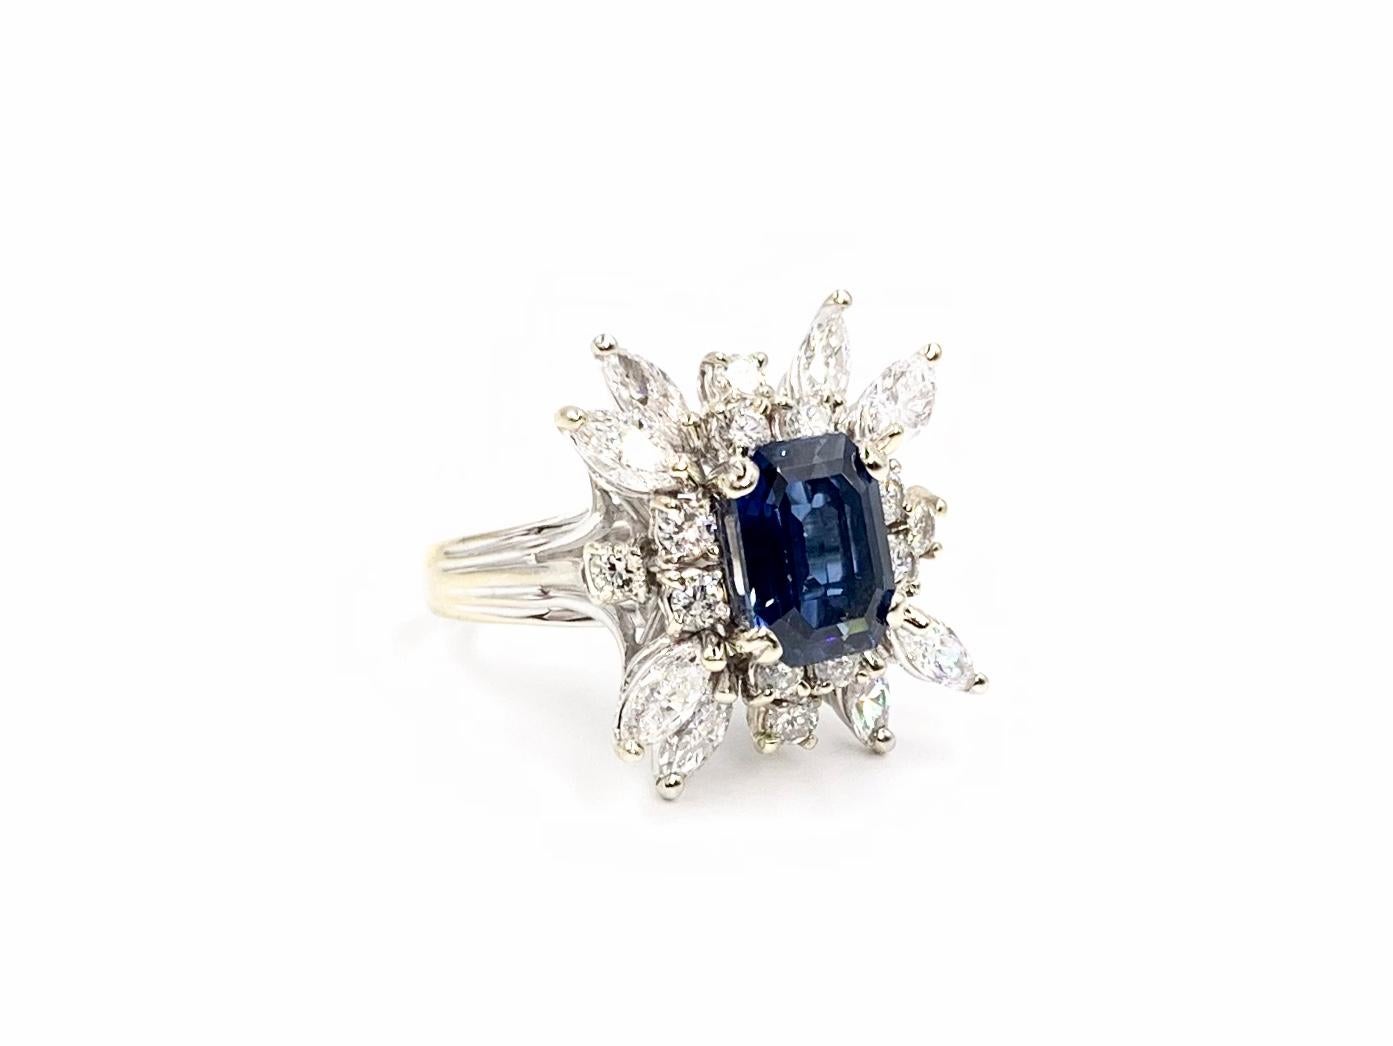 Circa 1975, this beautiful 14 karat white gold cocktail ring features a well saturated and vivid 2.80 carat emerald cut blue sapphire with medium transparency surrounded by approximately 1.60 carats of round brilliant and marquise cut white diamonds